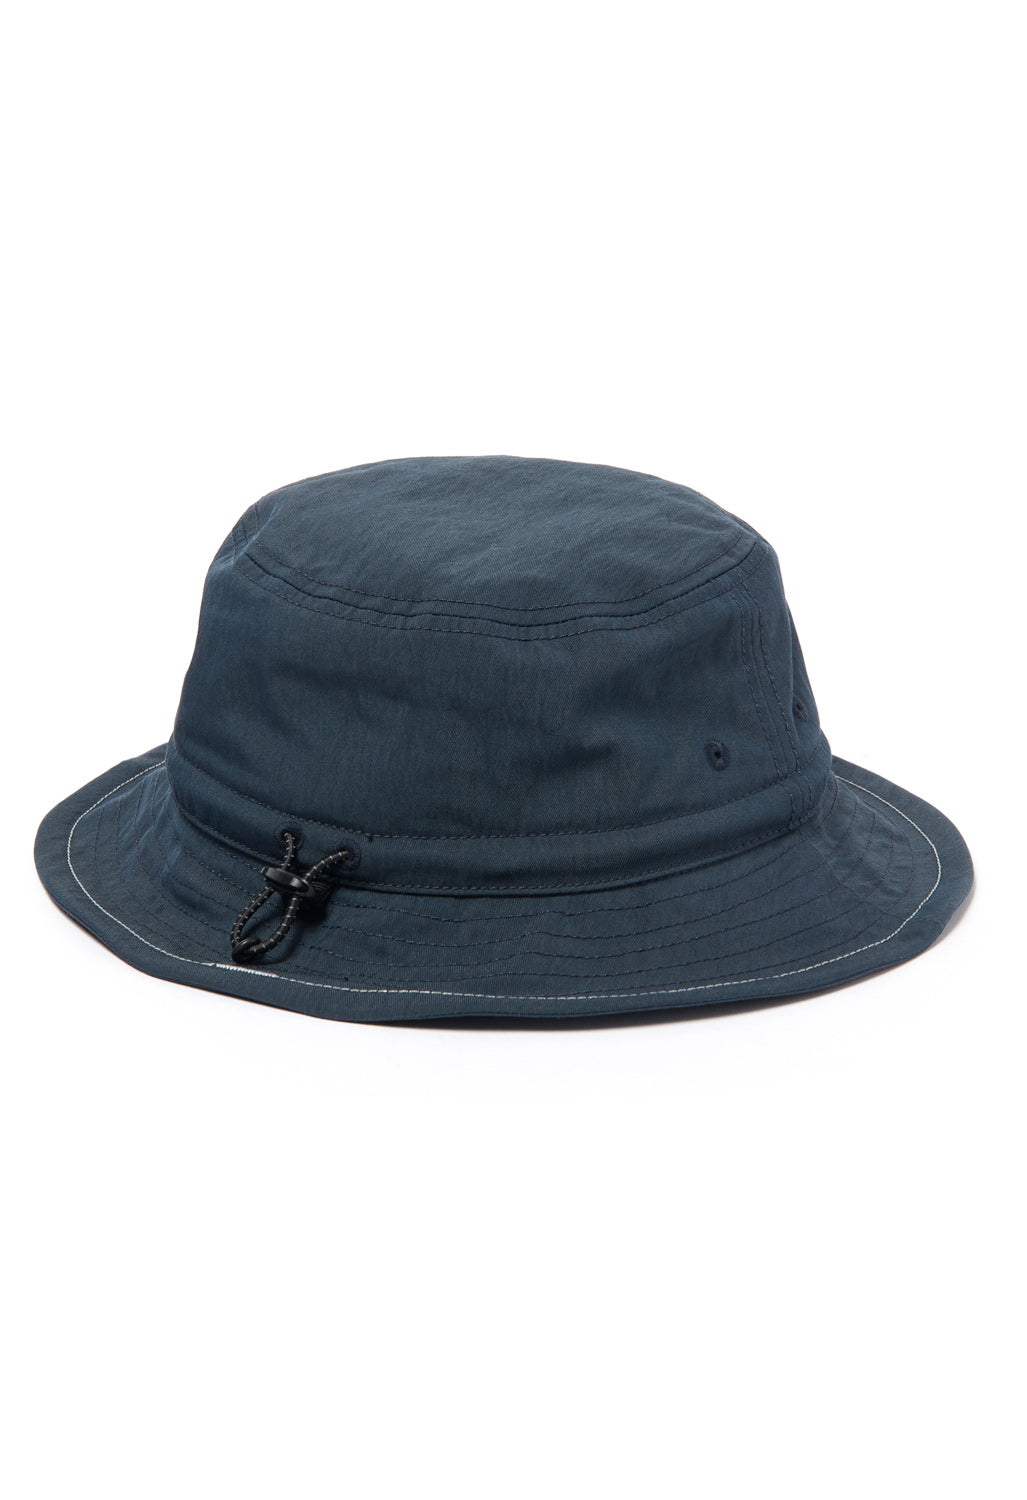 Gramicci x And Wander Nyco Hat - Navy